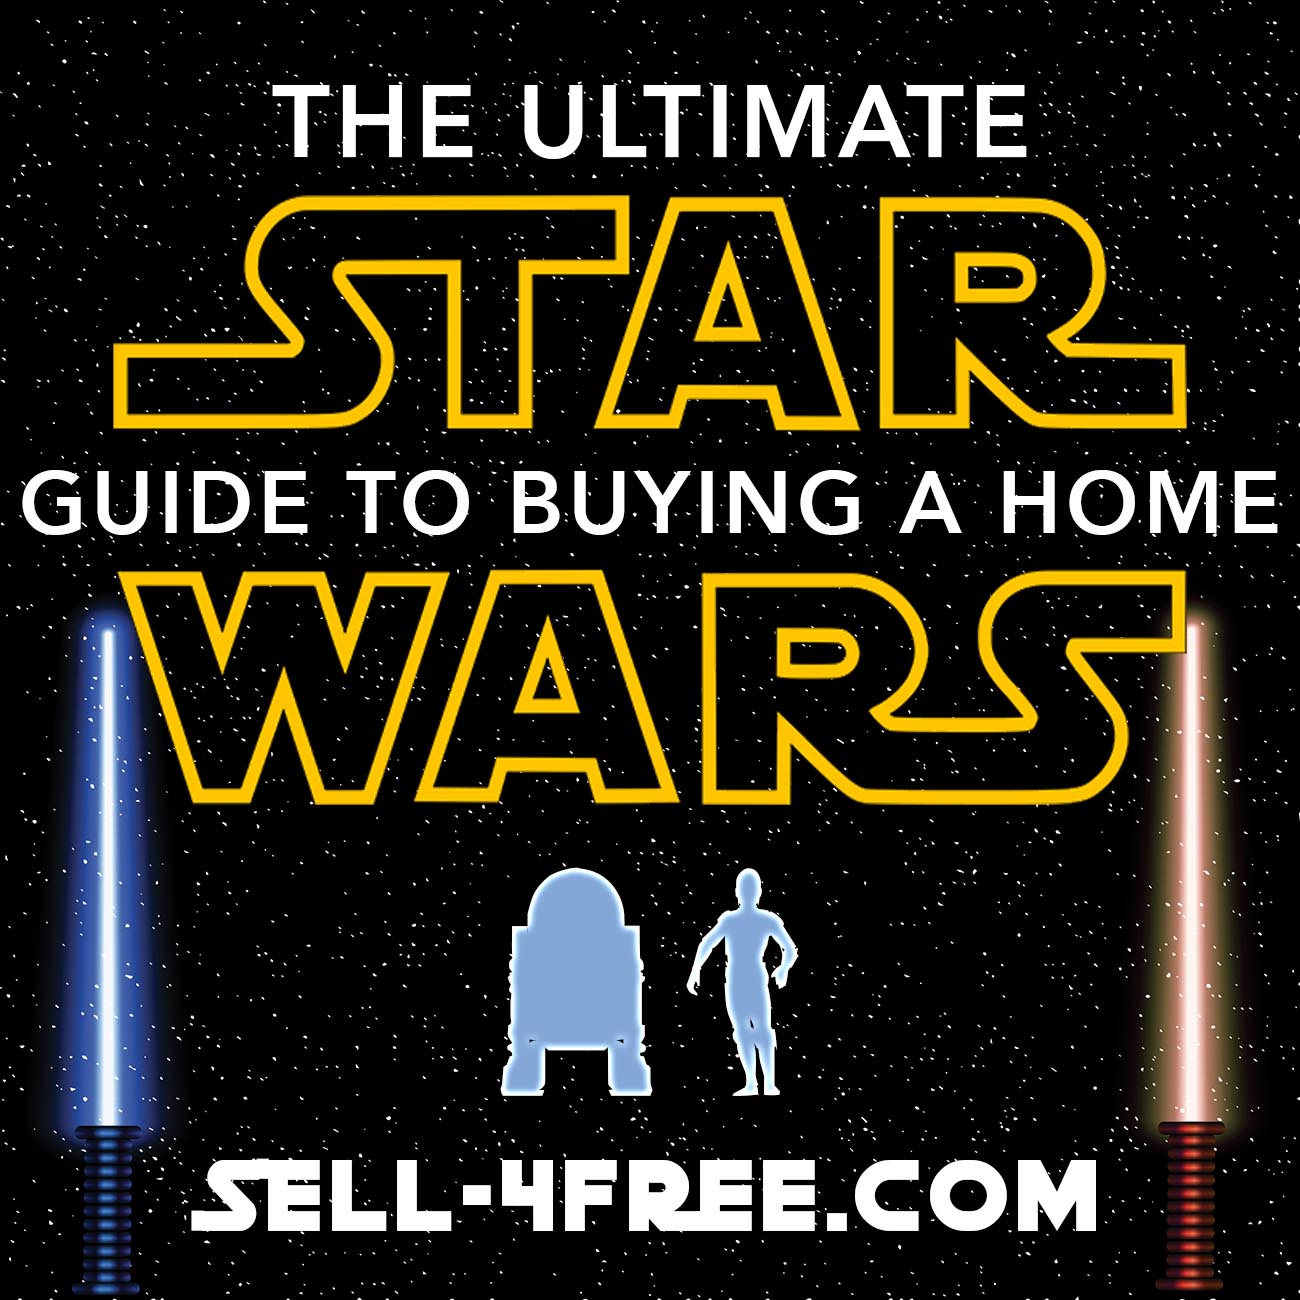 The Ultimate Star Wars Guide to Buying a Home